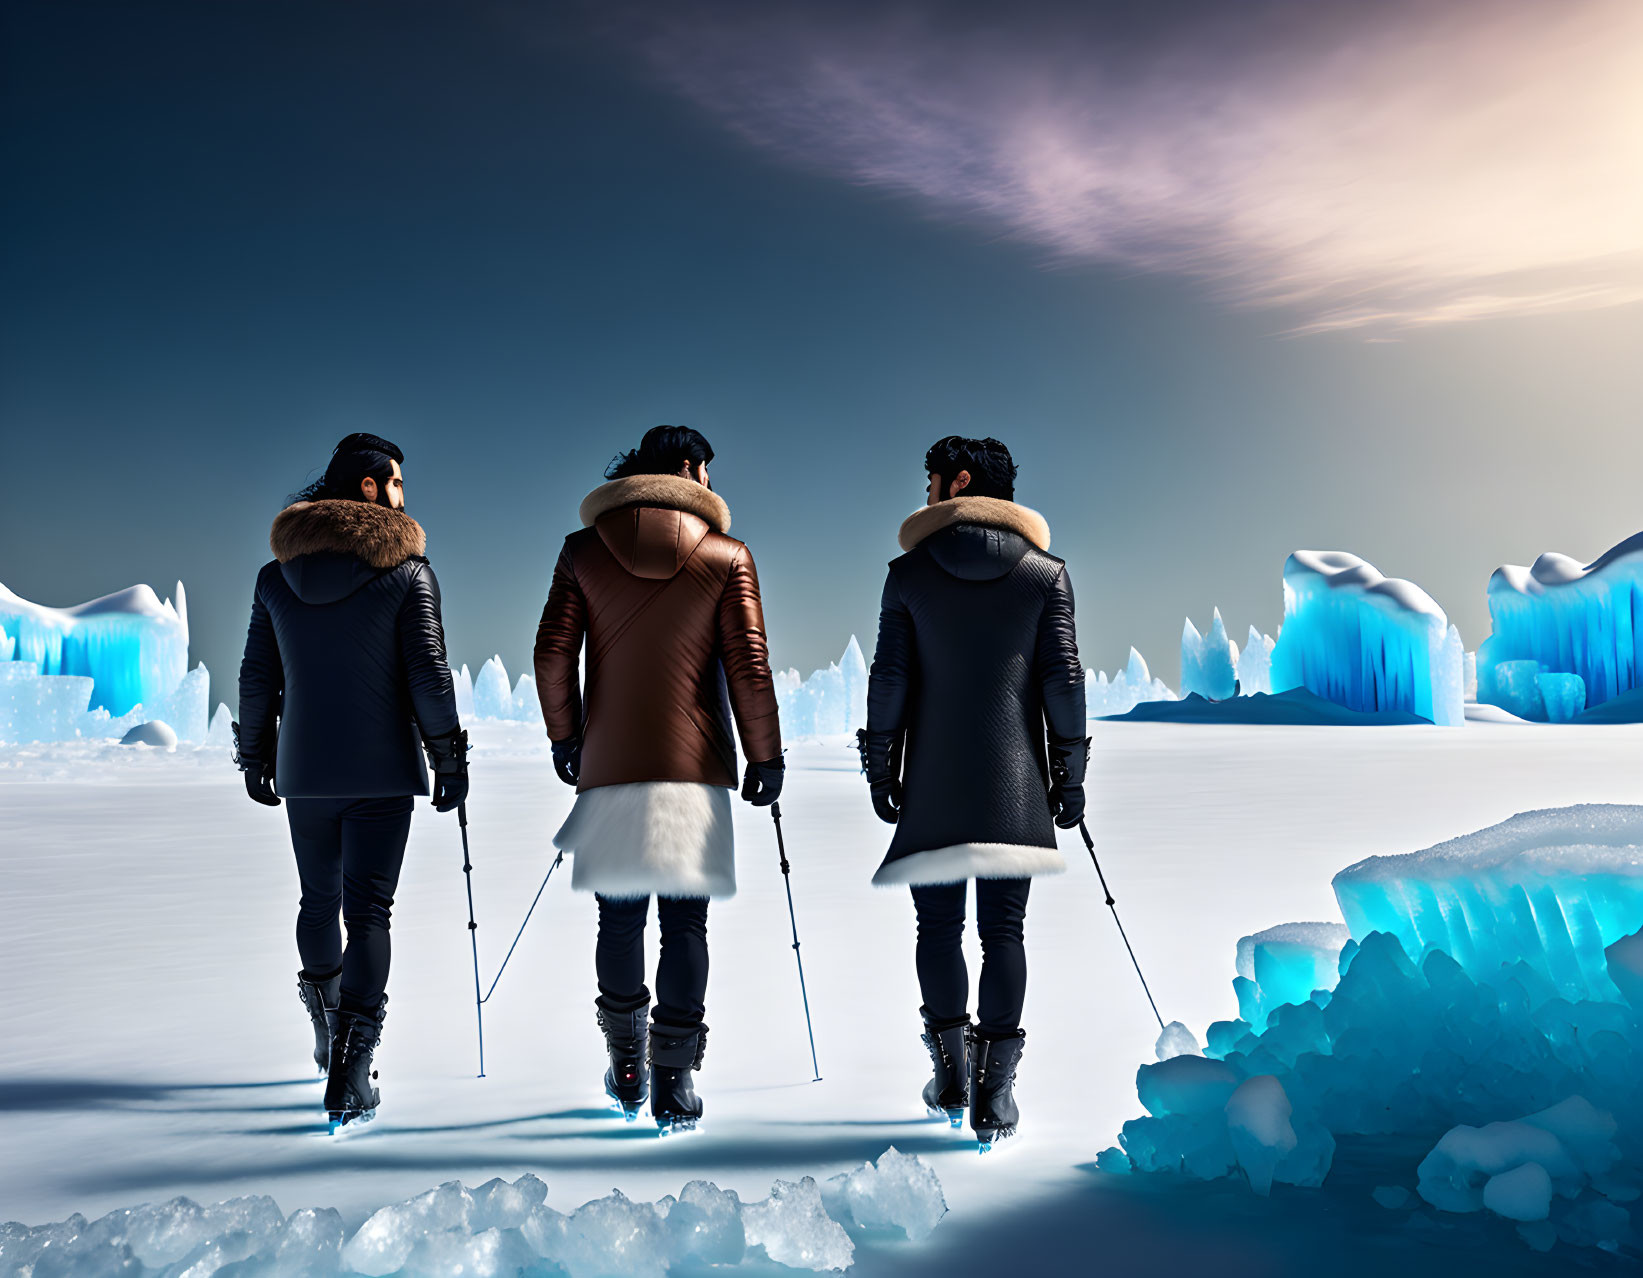 Group of Four People Trekking Snowy Landscape with Ice Formations